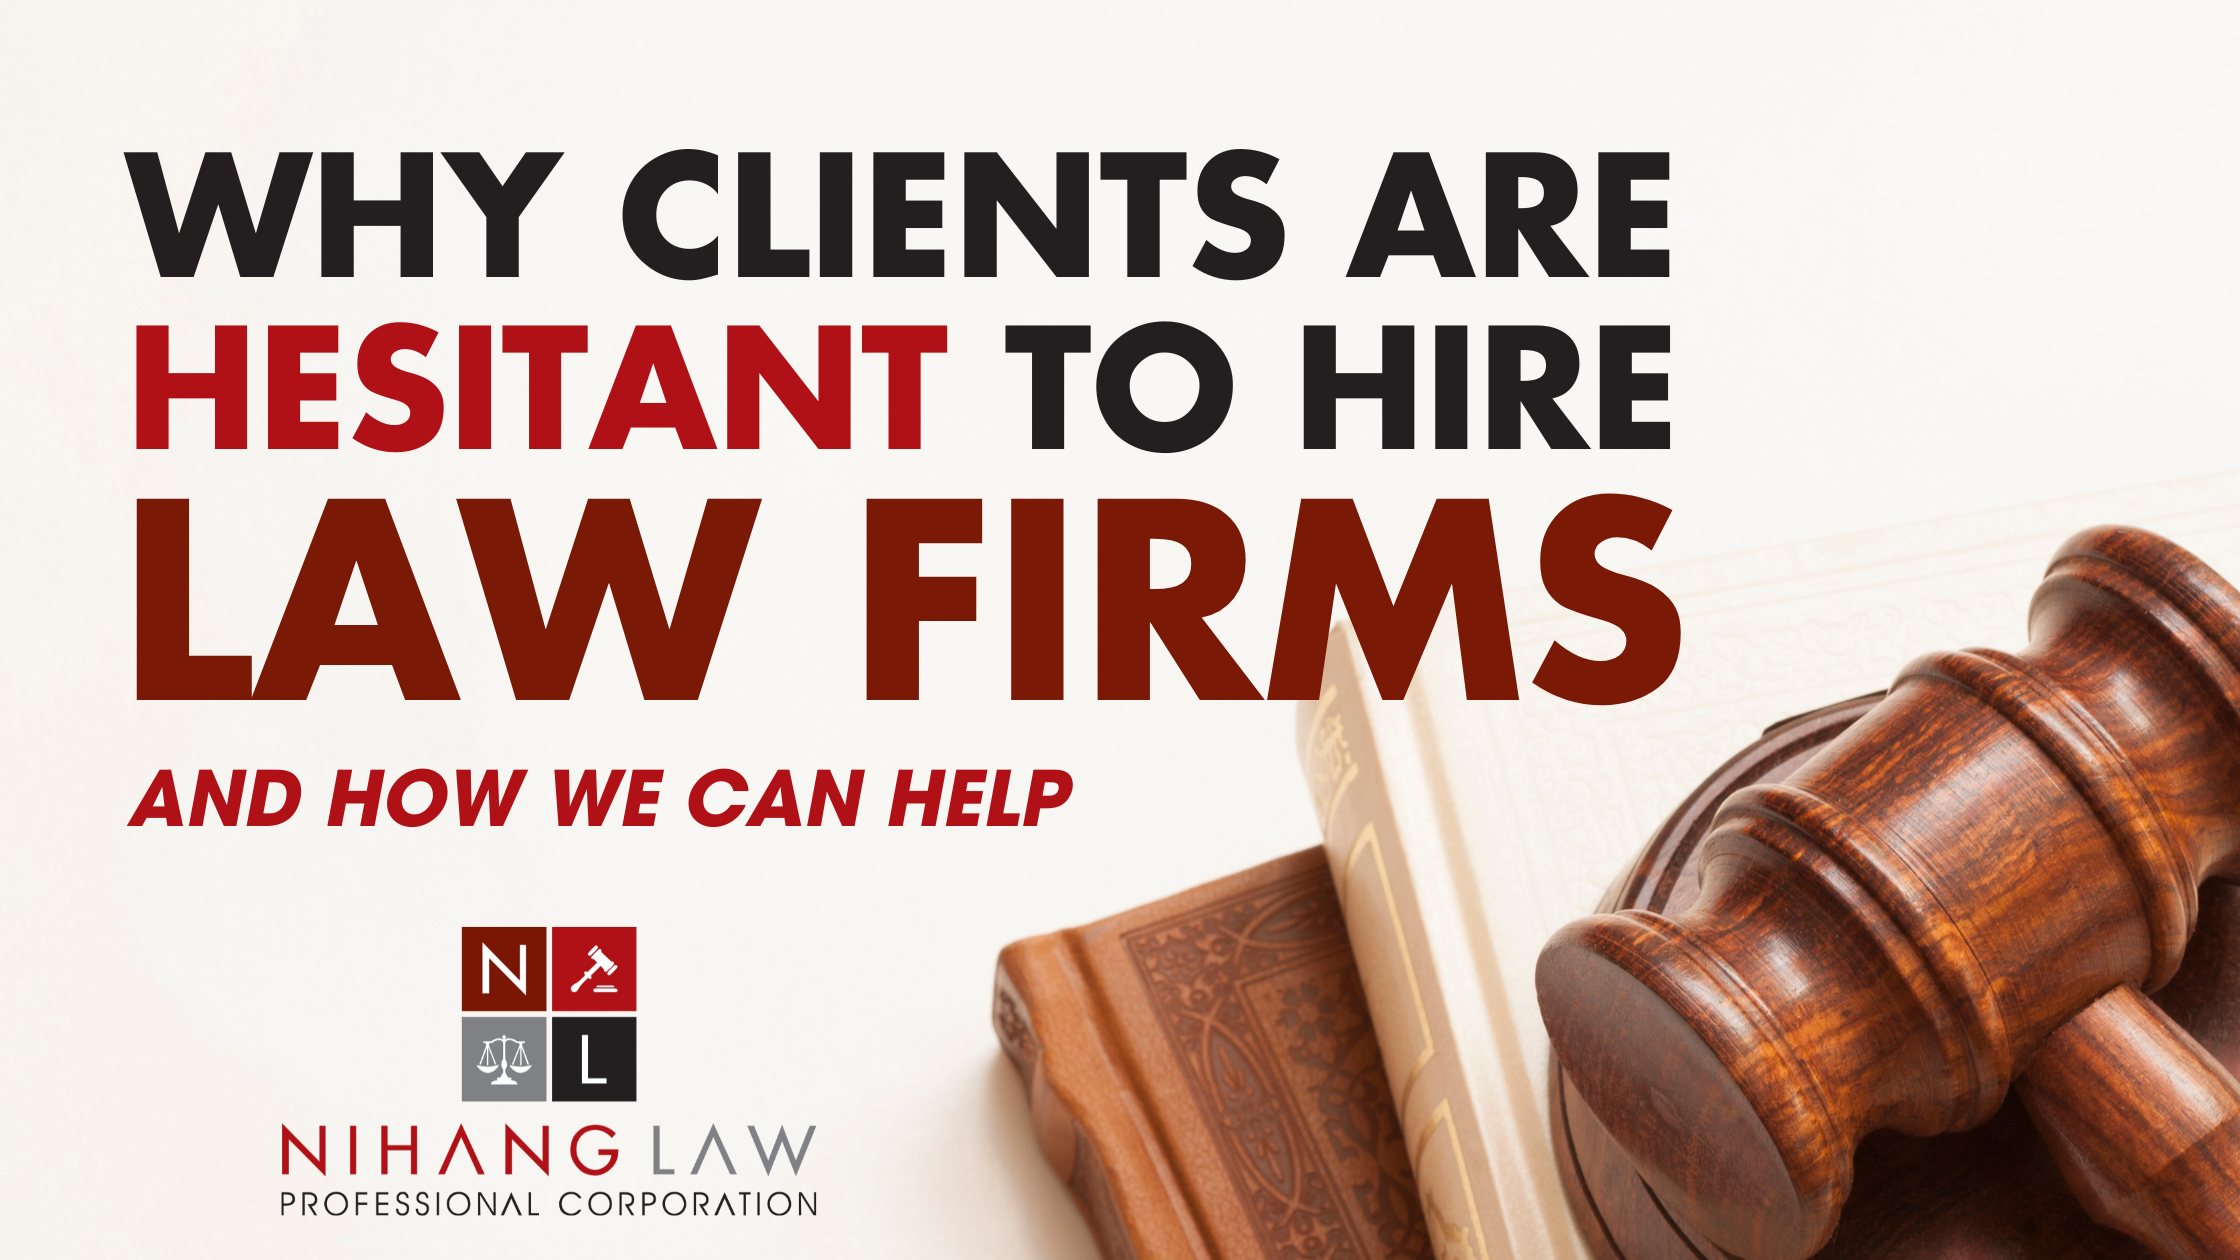 Reasons Why Clients are Hesitant to Hire Law Firms